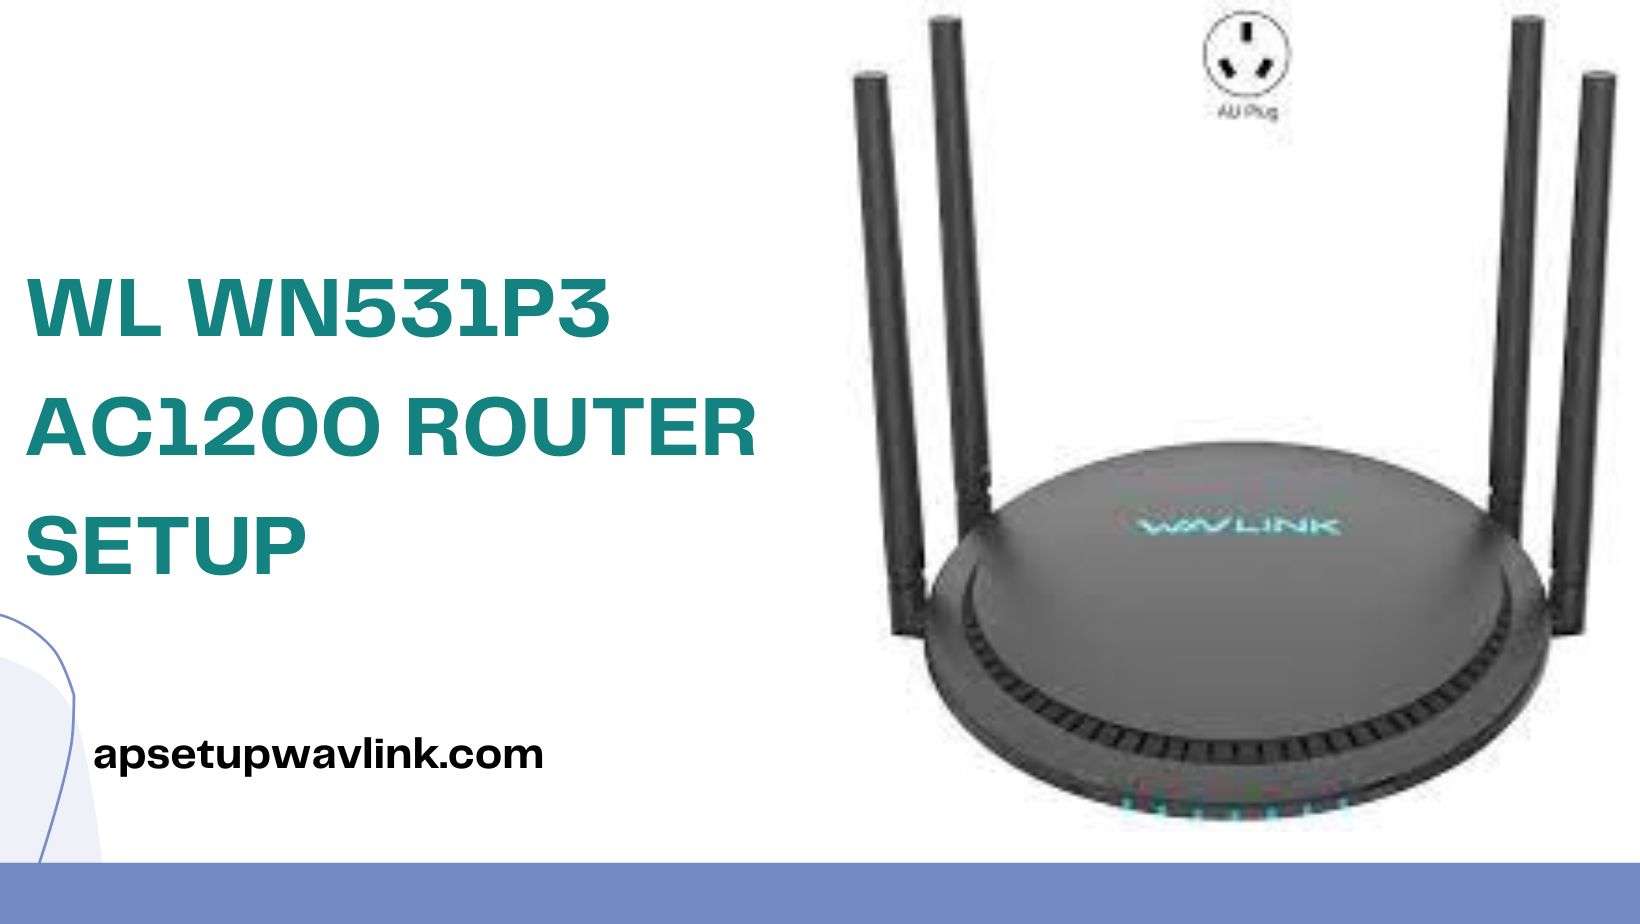 You are currently viewing Wl WN531P3 AC1200 Router Setup 